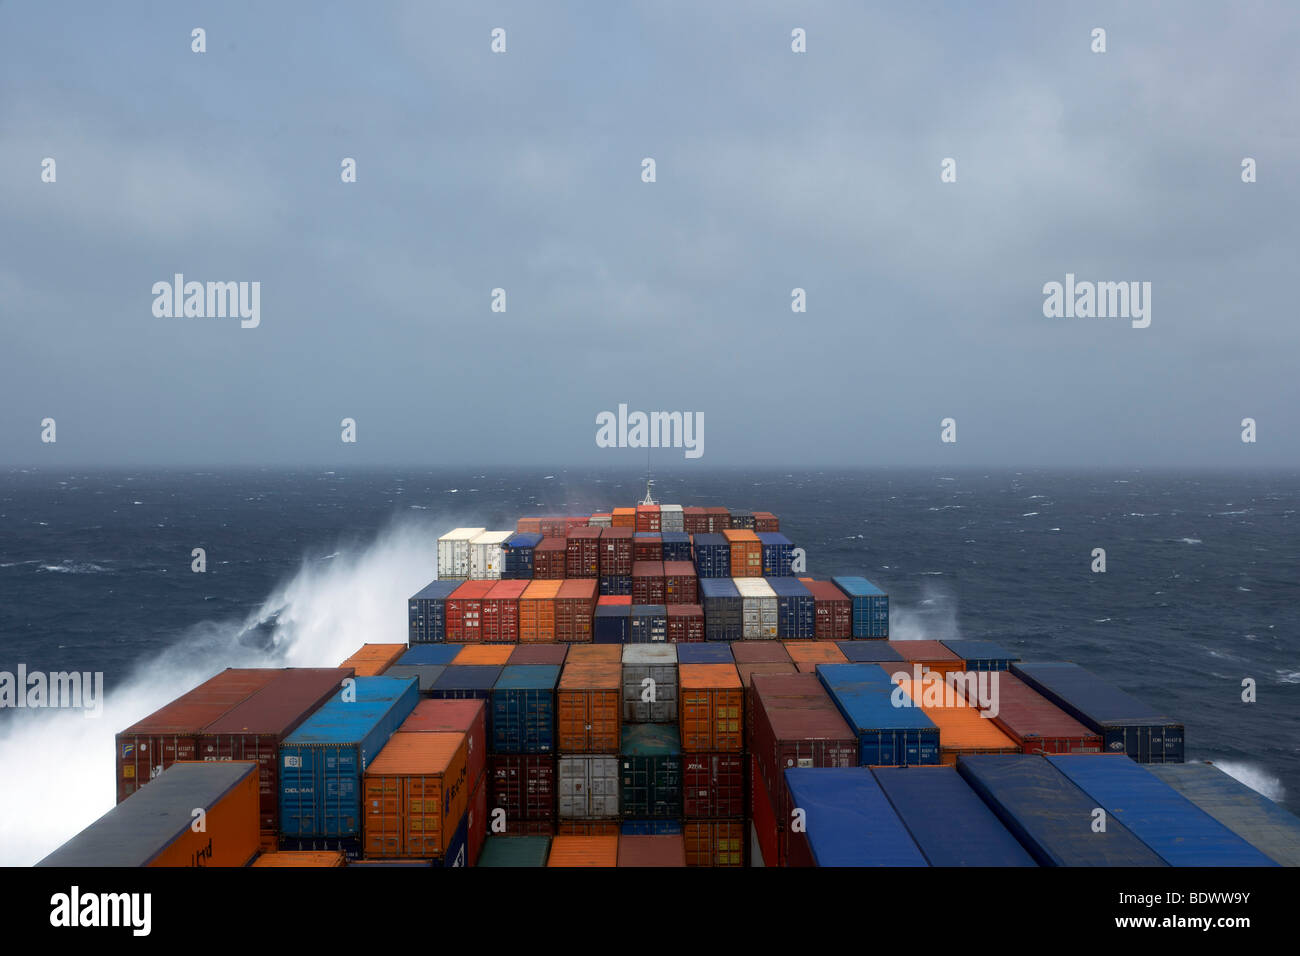 Container ship, sea, swell Stock Photo